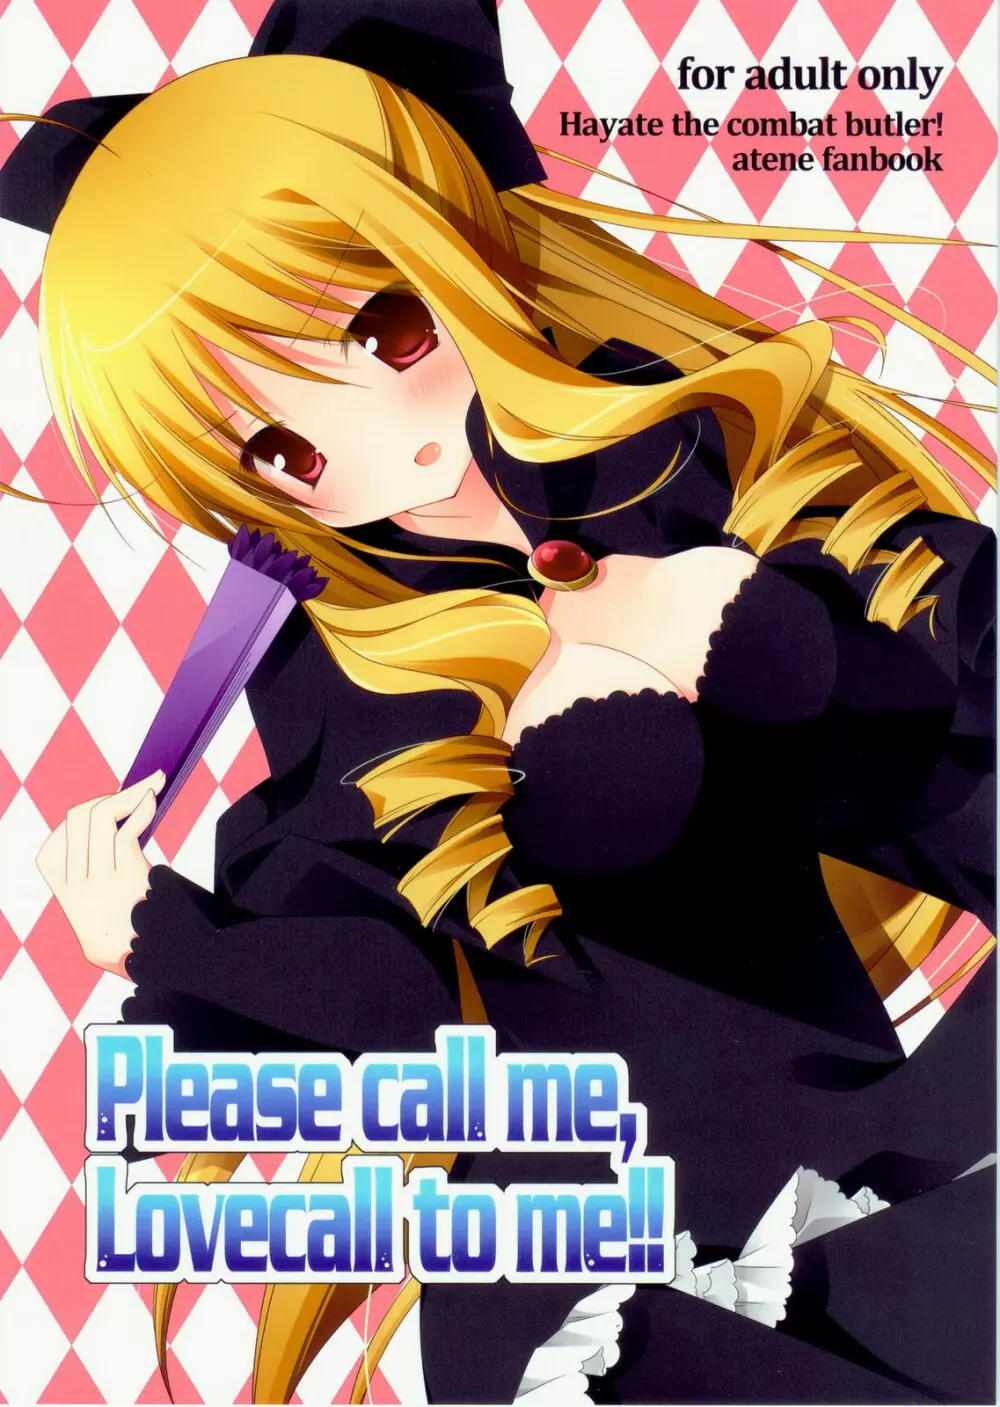 Please call me, Lovecall to me!!